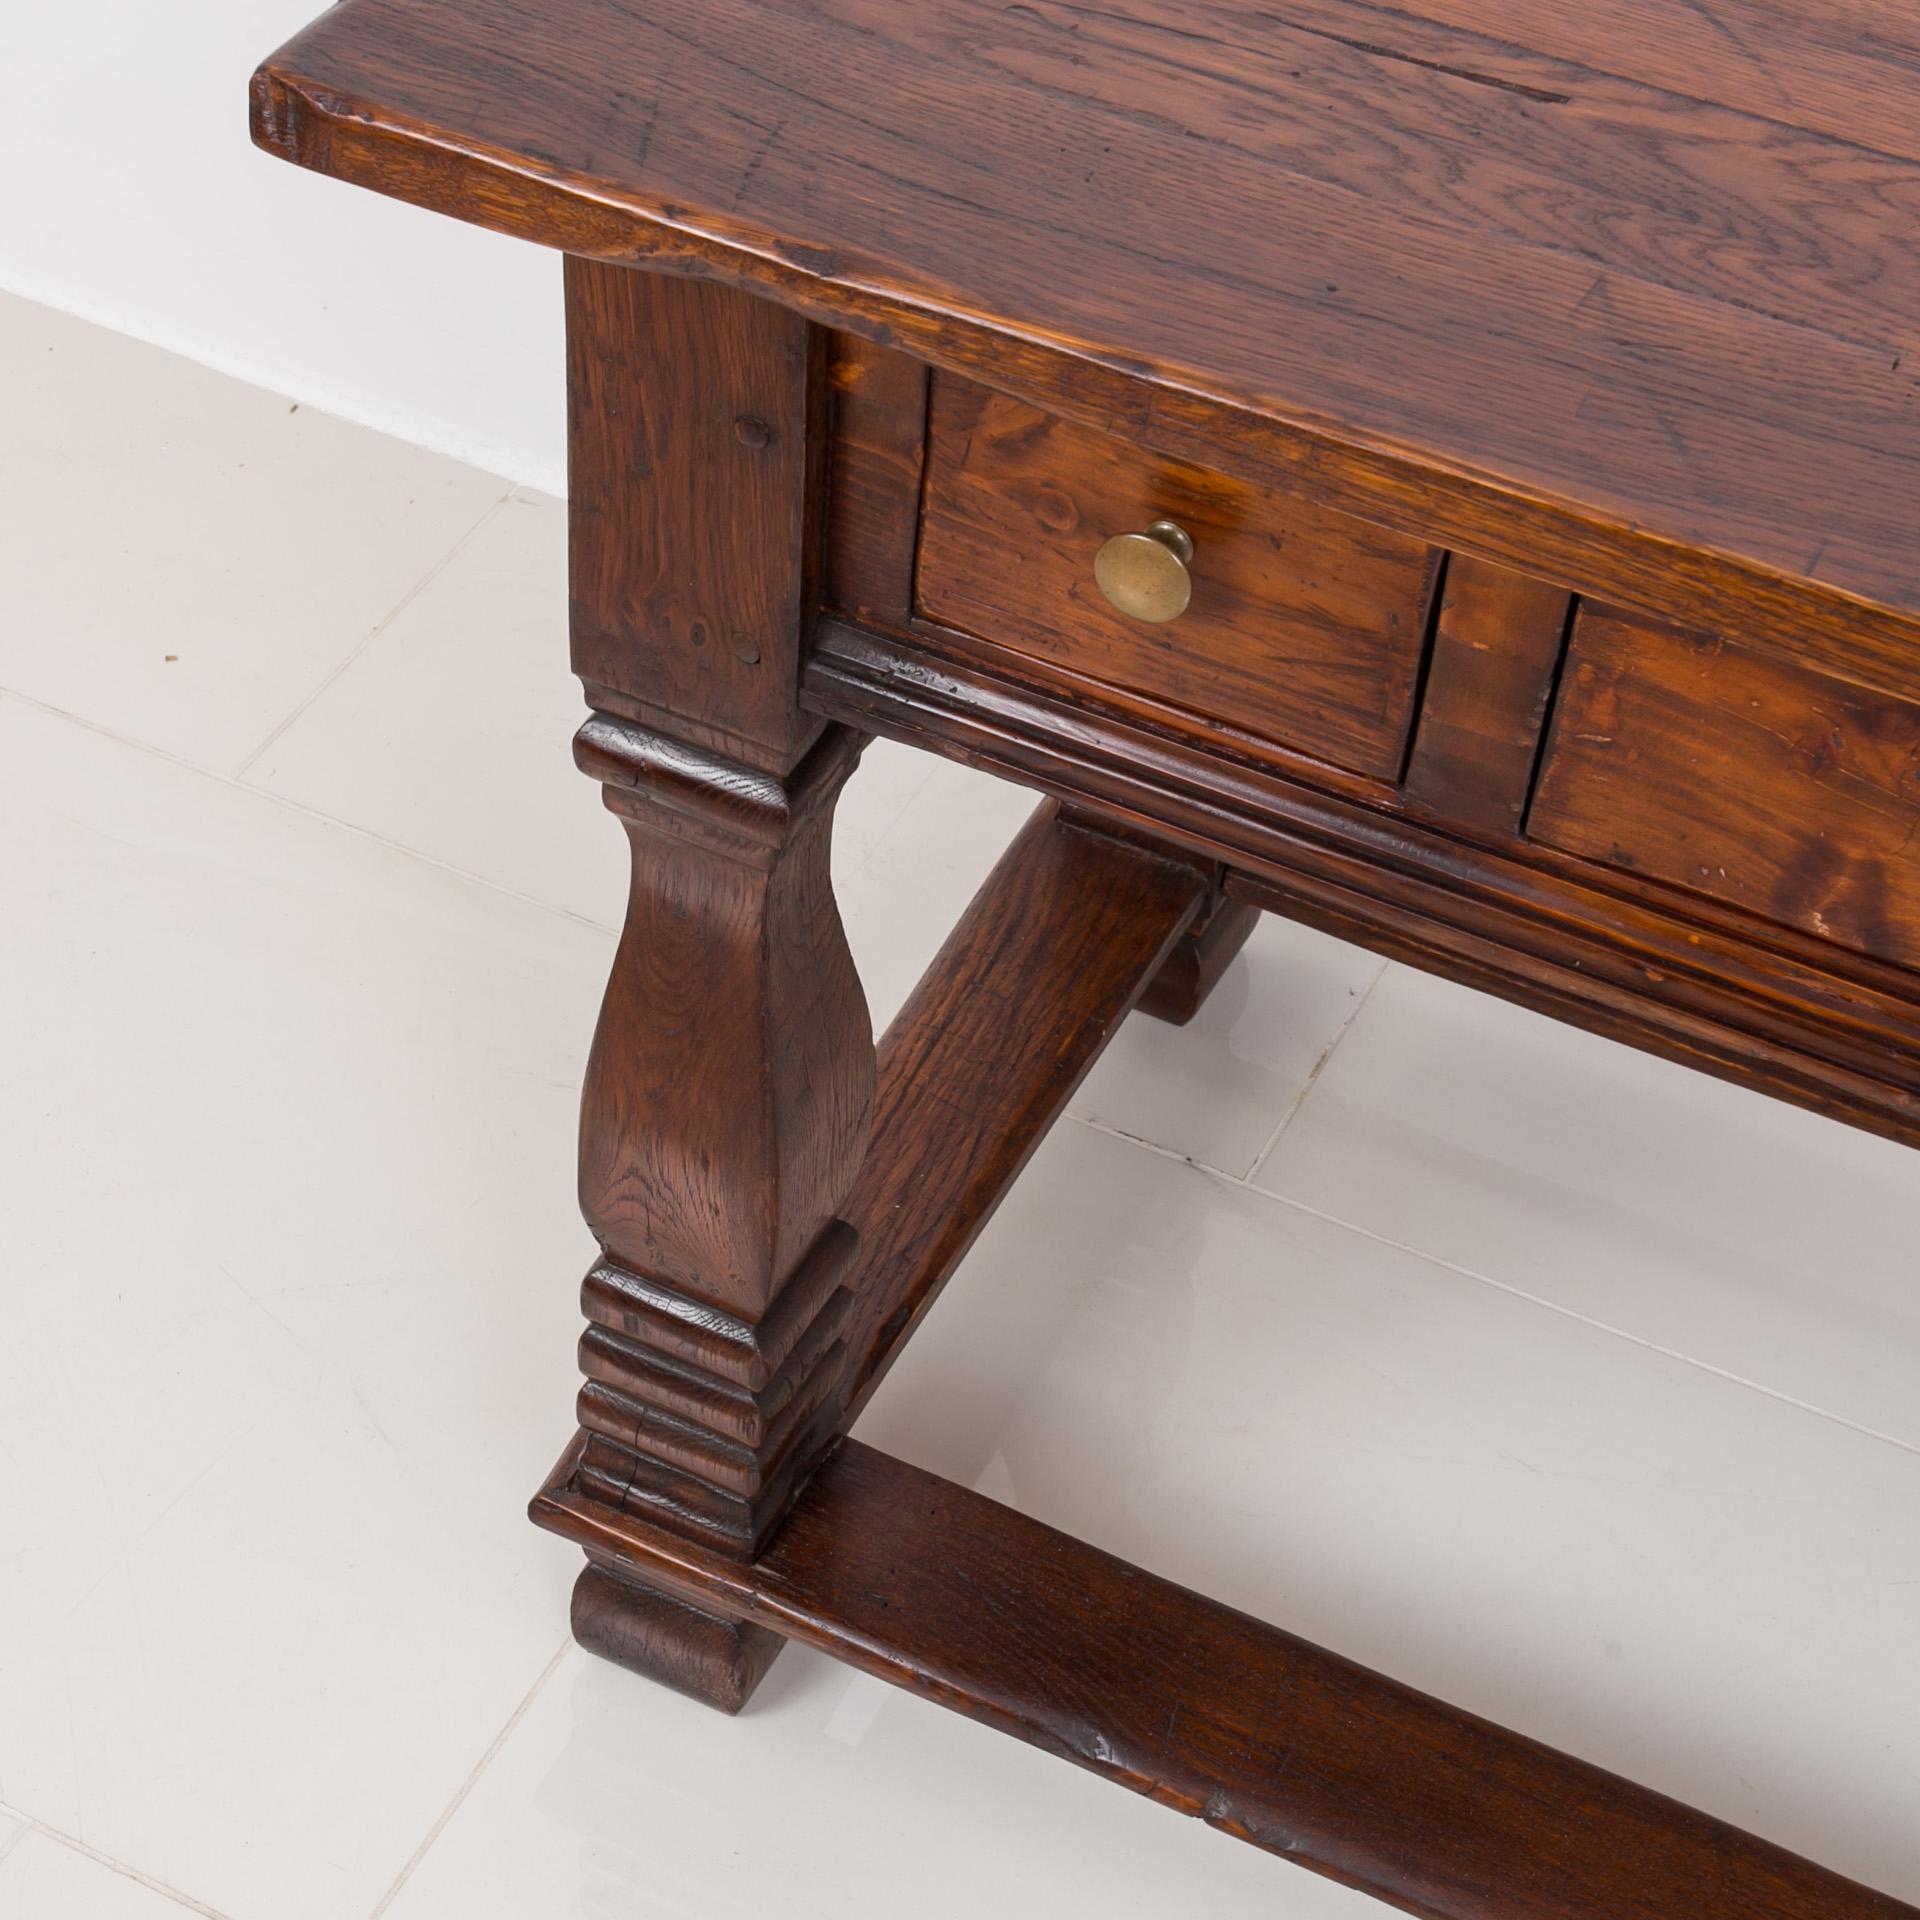 Solid Oak Table, 18th / 19th Century, Rustic Style, Prep or Dining Table 9